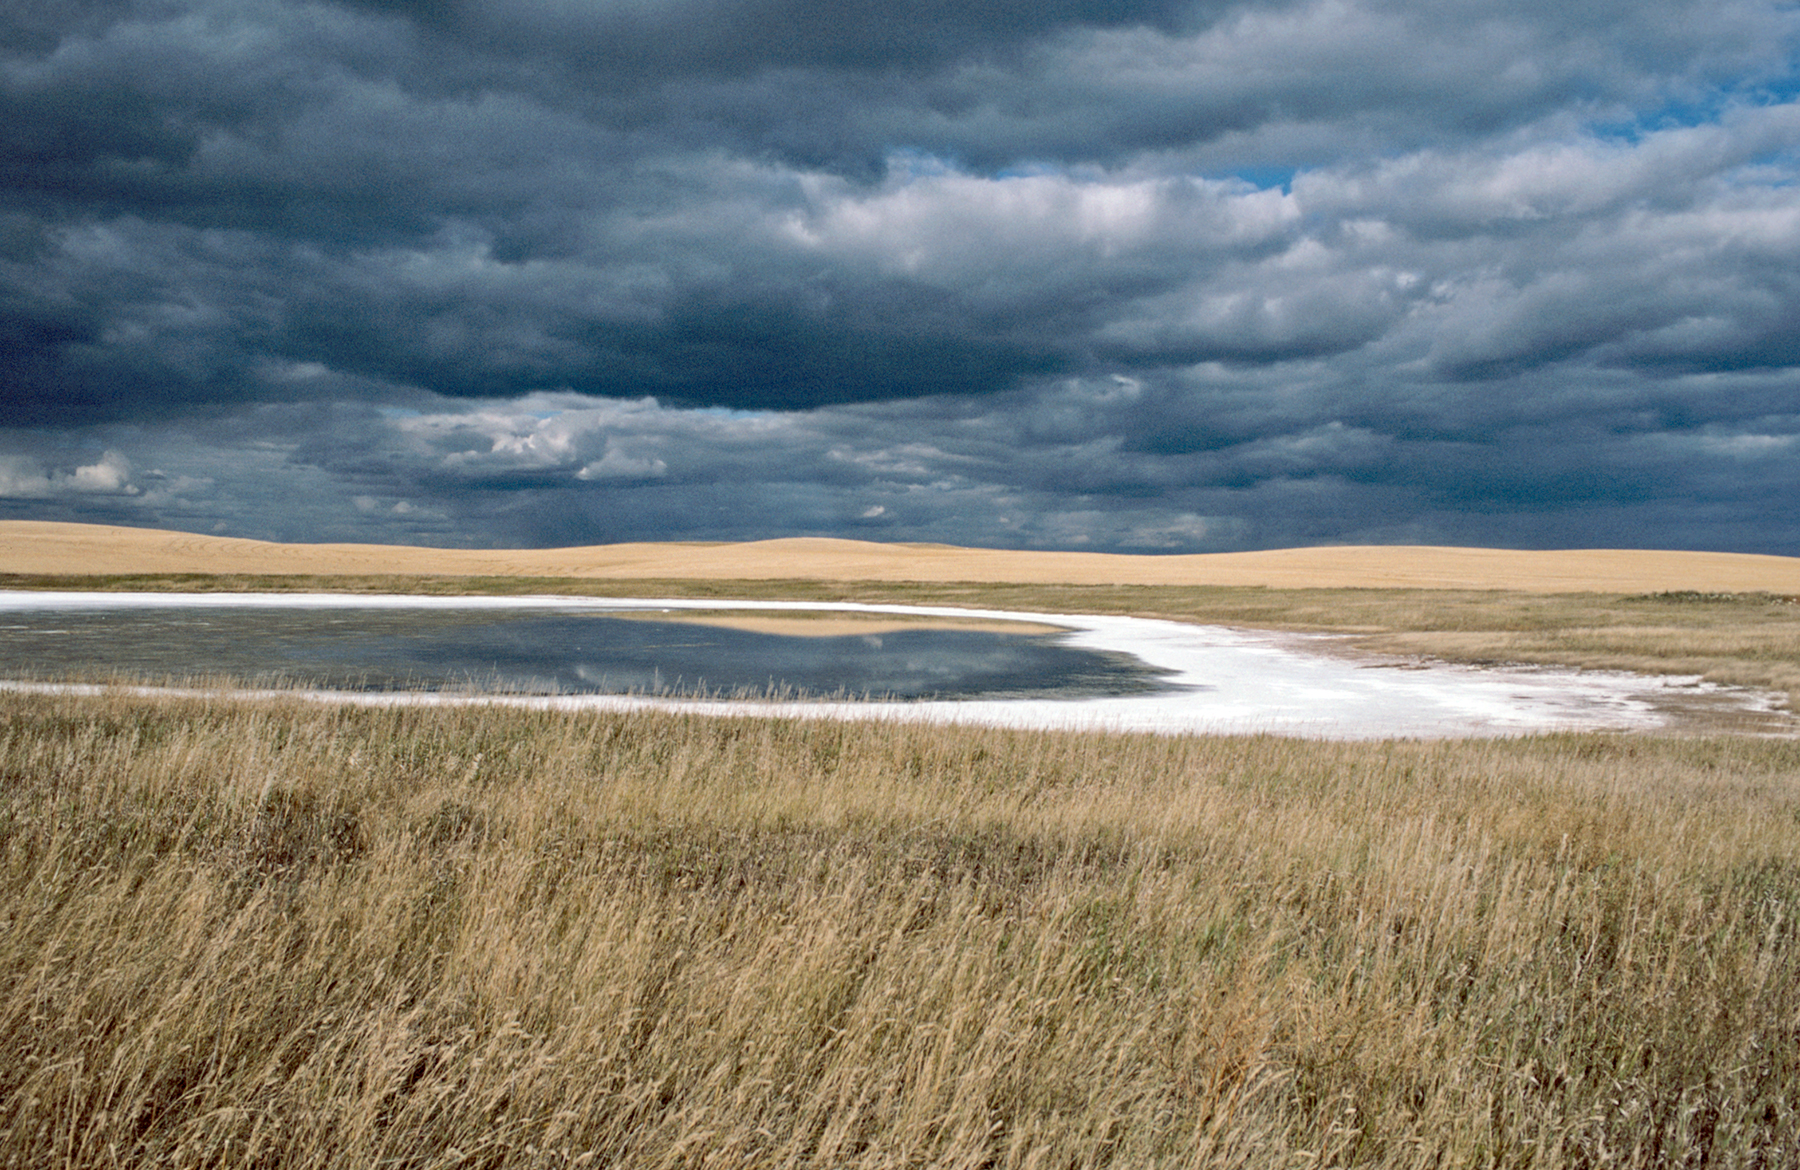 A lake outlined by a white shore surrounded by prairie grass under a very dark, cloudy sky.